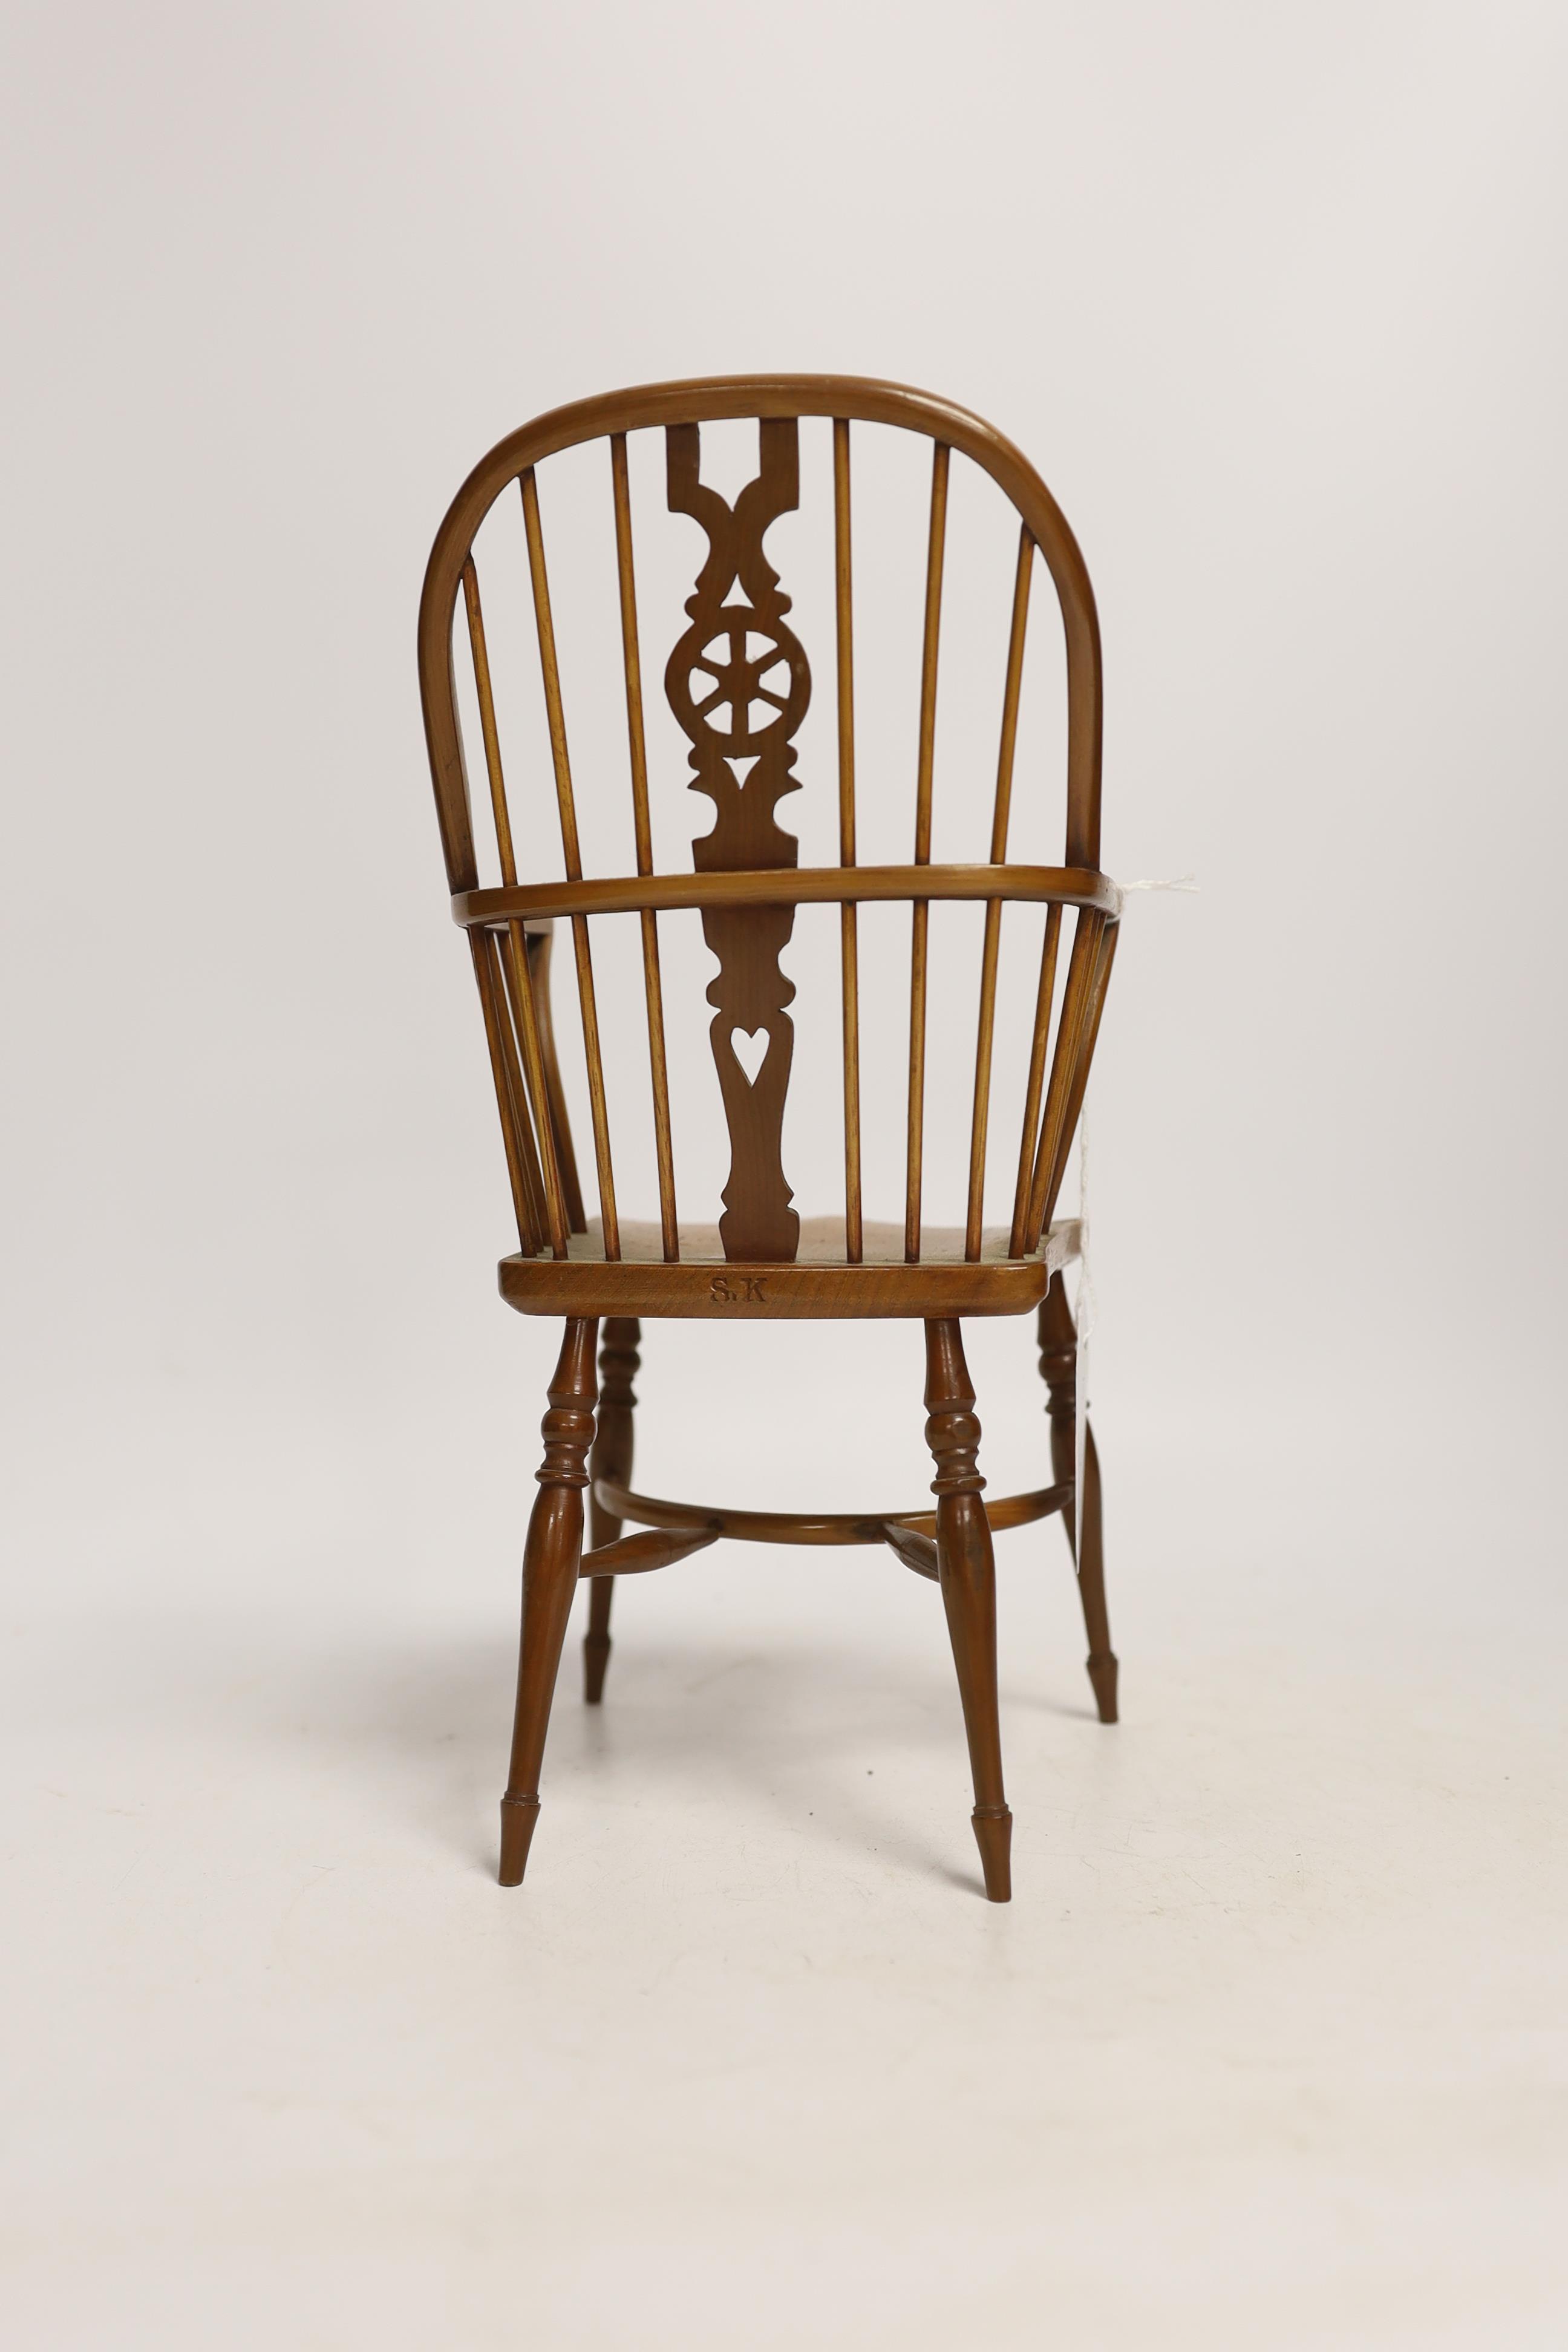 A Stuart King model of a Windsor chair, dated 1976, 27cm